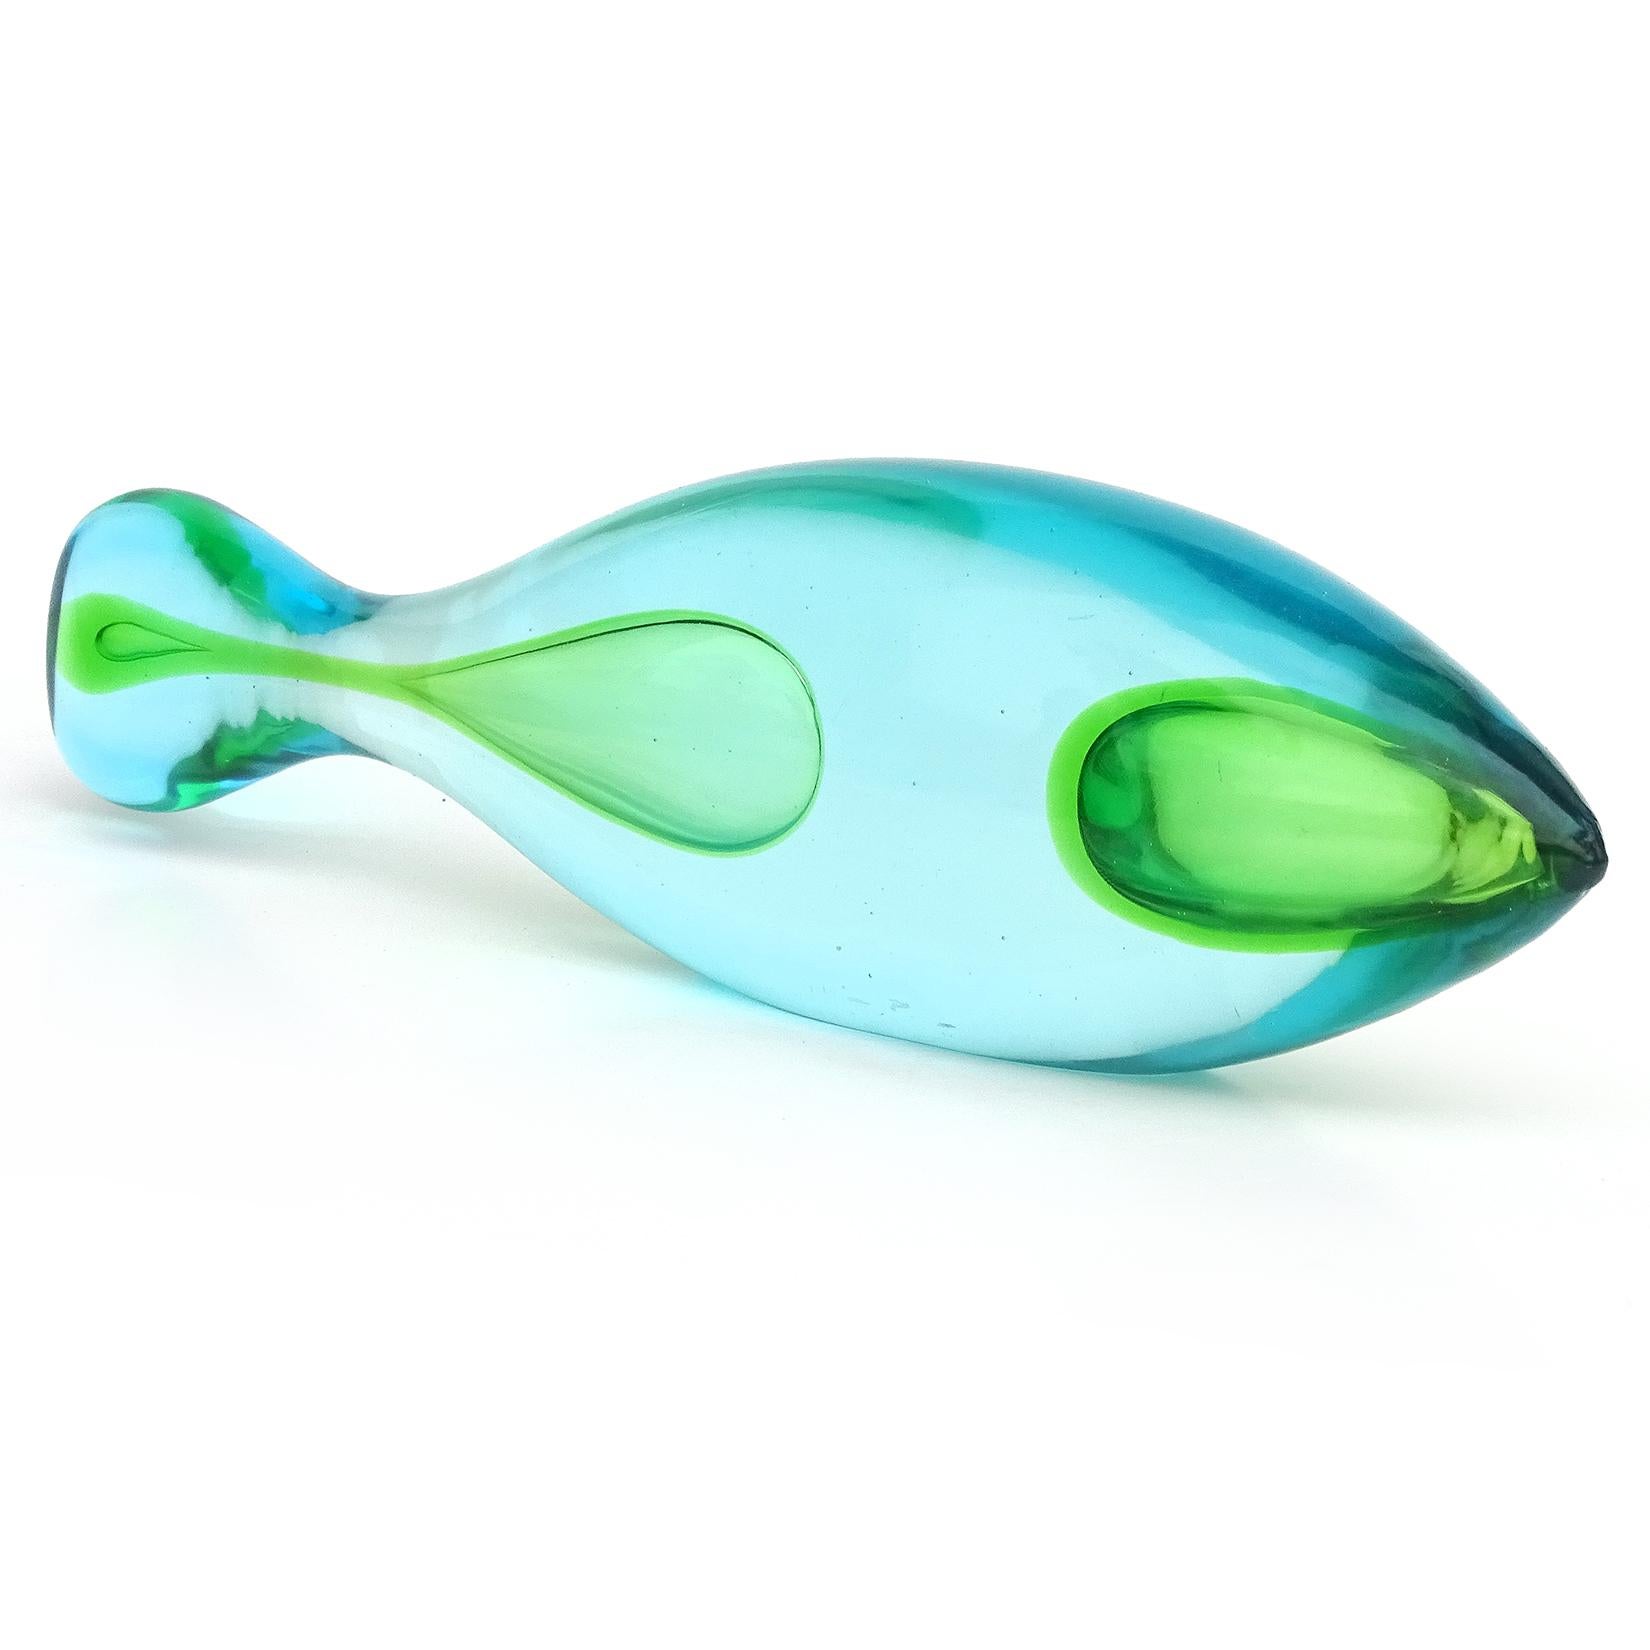 Hand-Crafted Murano Vintage Sommerso Sky Blue Green Italian Art Glass Abstract Fish Sculpture